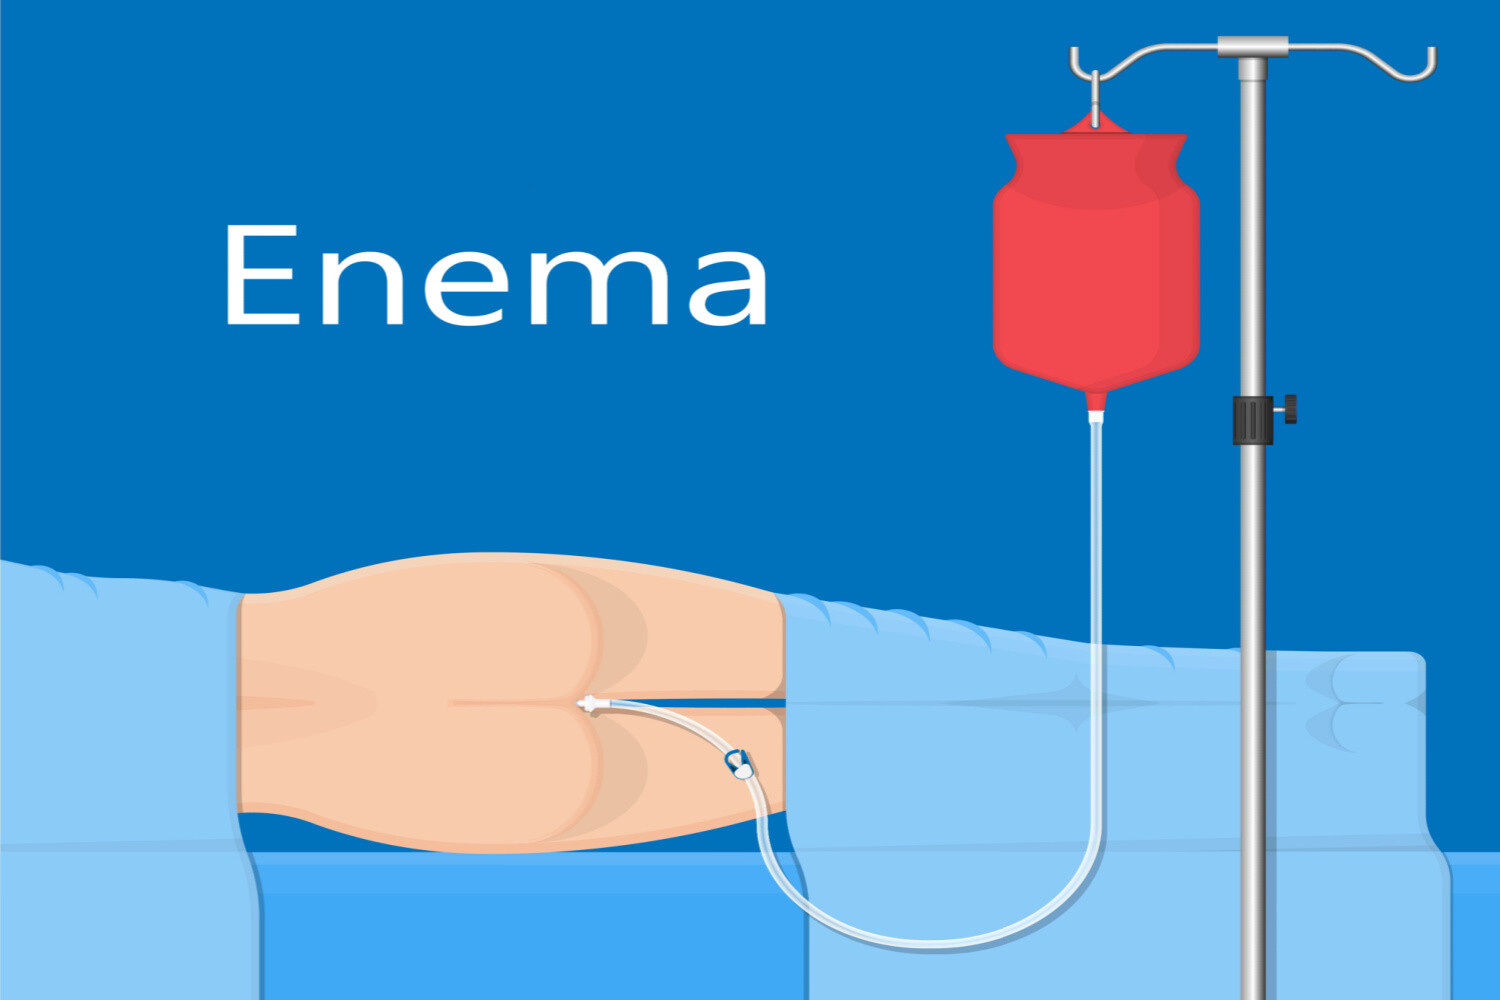 Steps to give enema to children